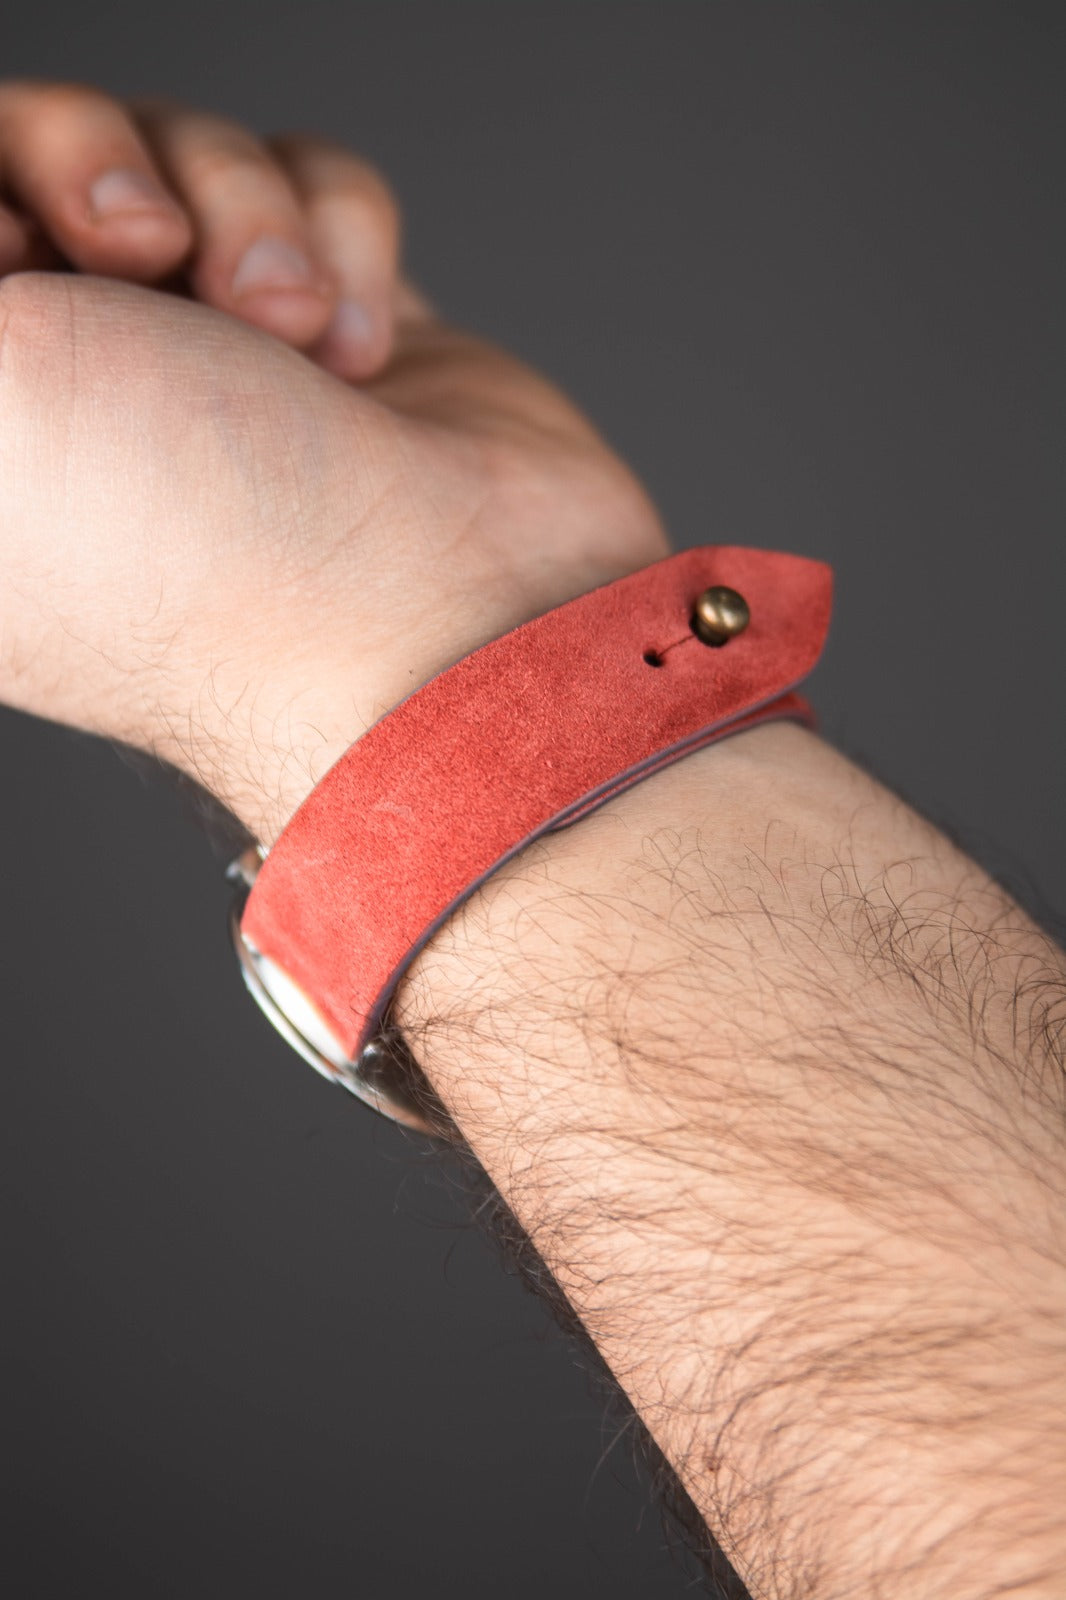 Salmon Red Suede Leather Watch Strap - The Hermoso